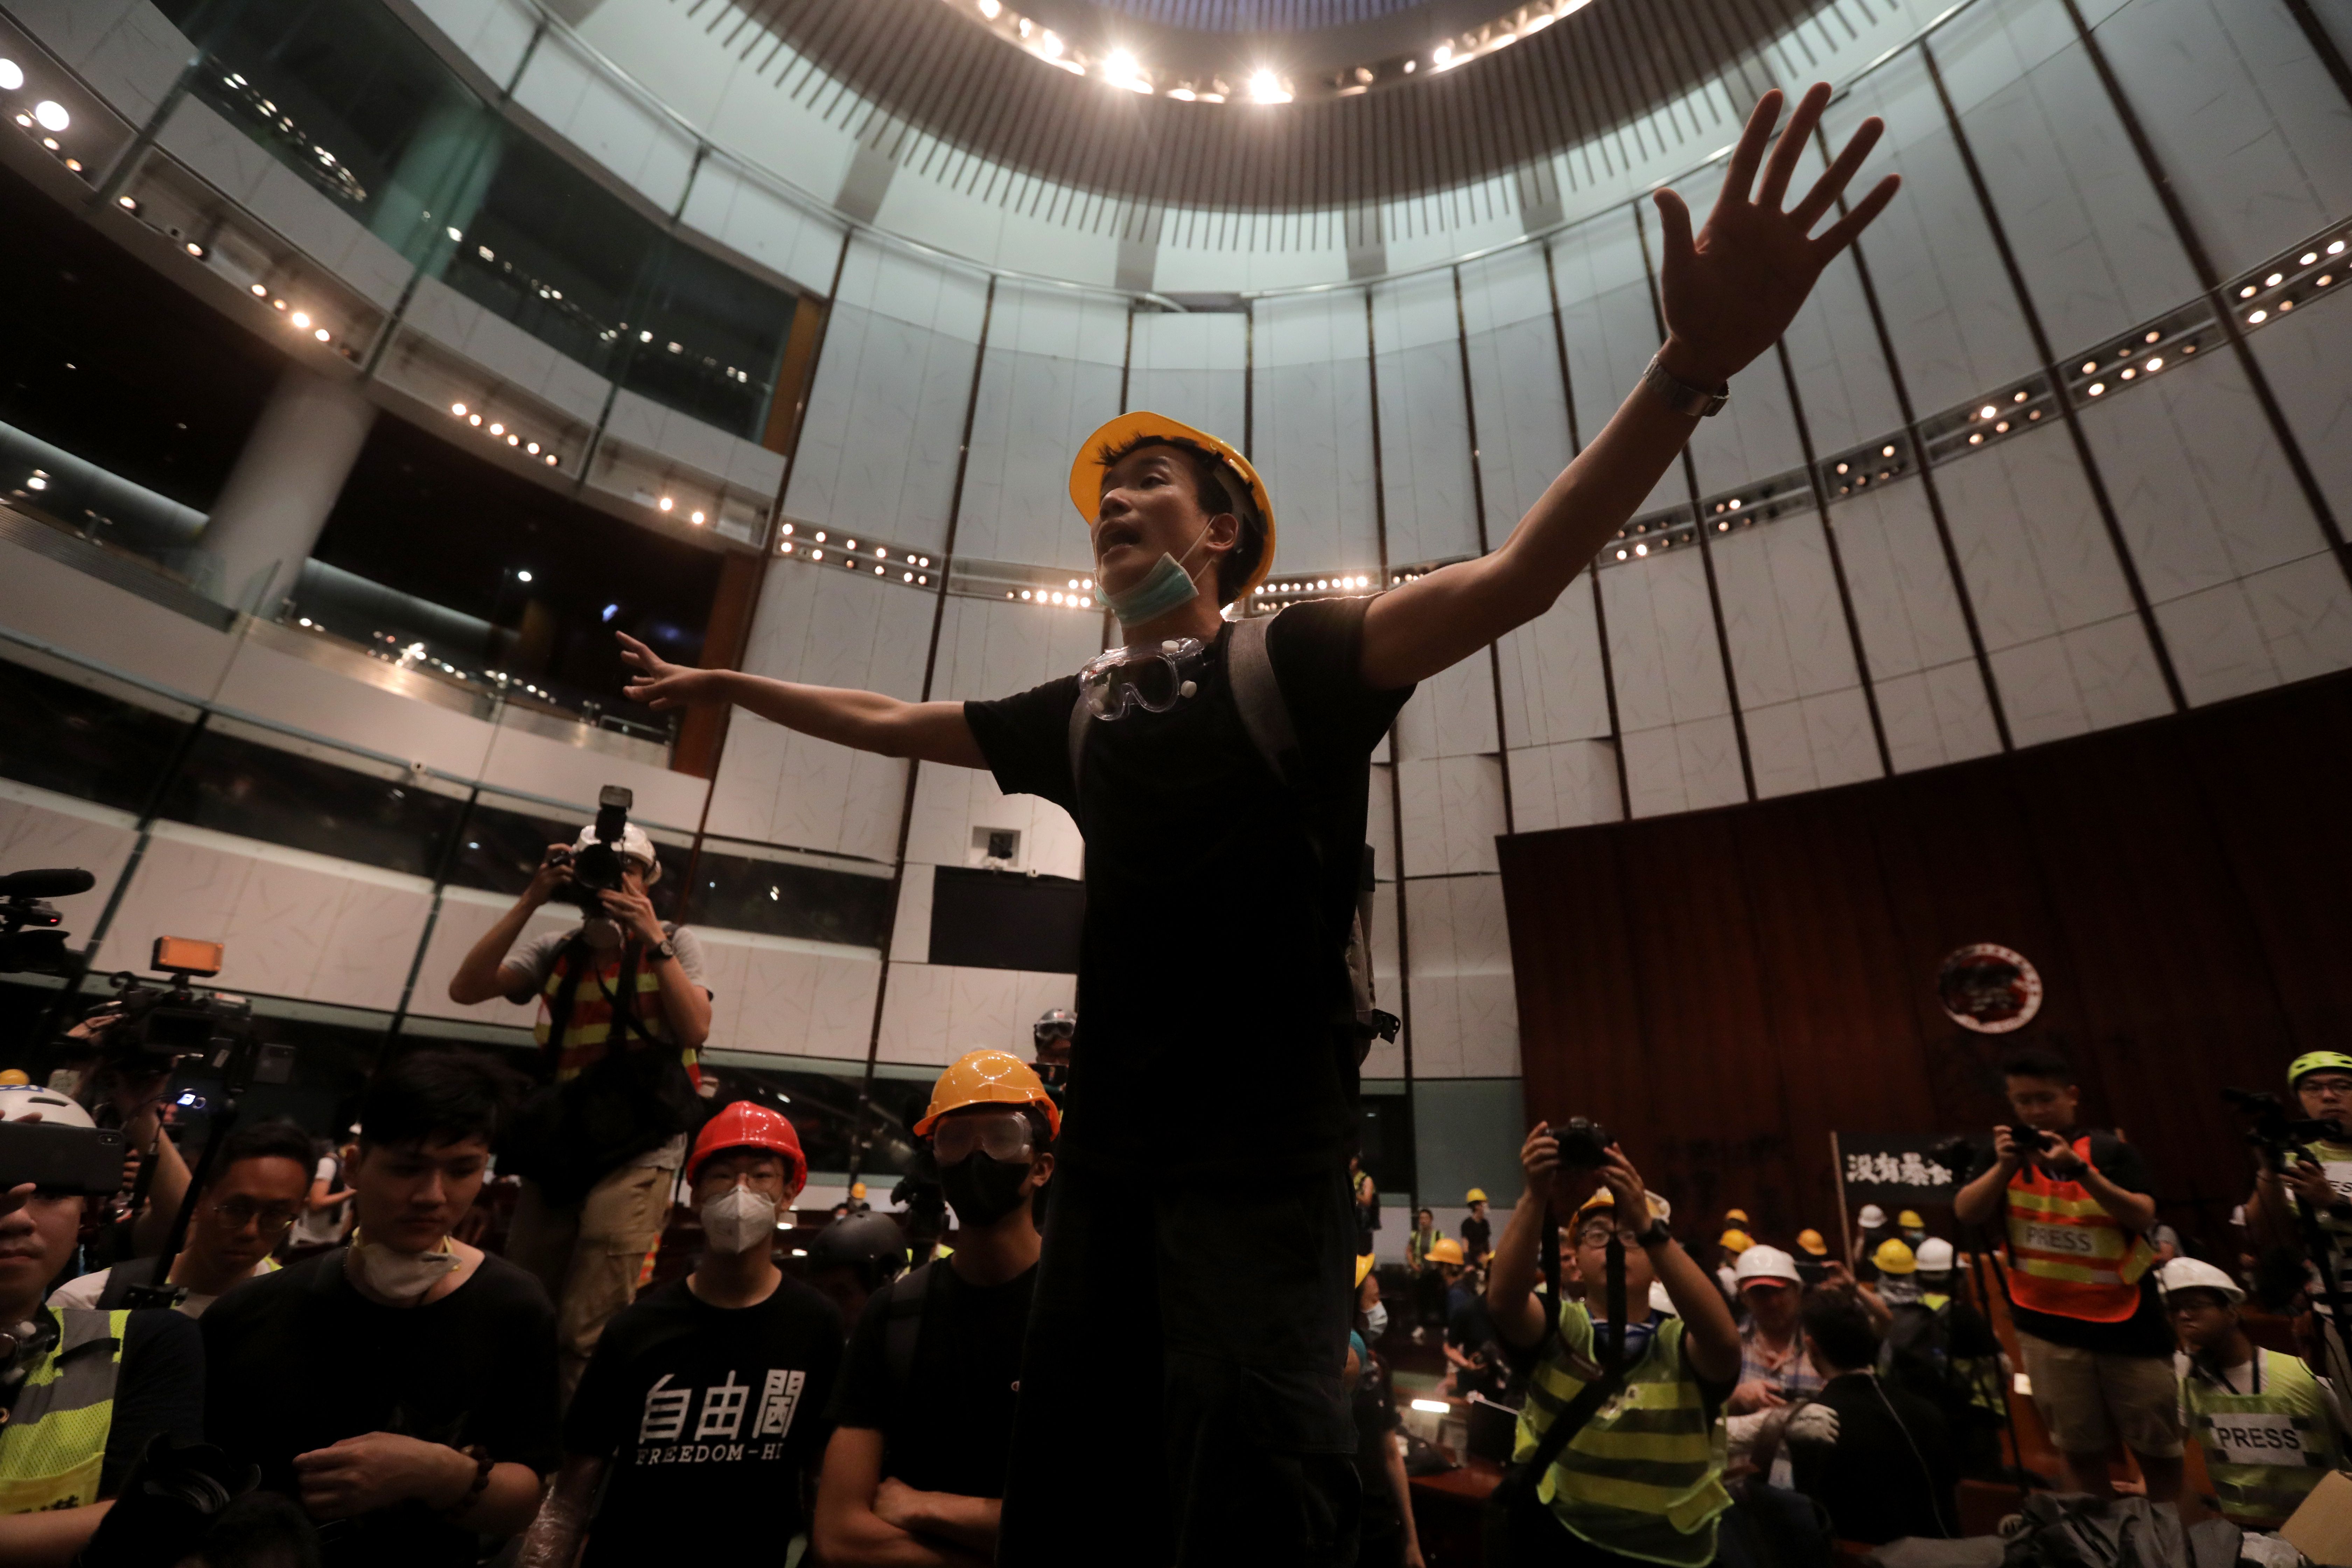 A protester gestures after they broke into the parliament chamber of the government headquarters in Hong Kong on July 1.